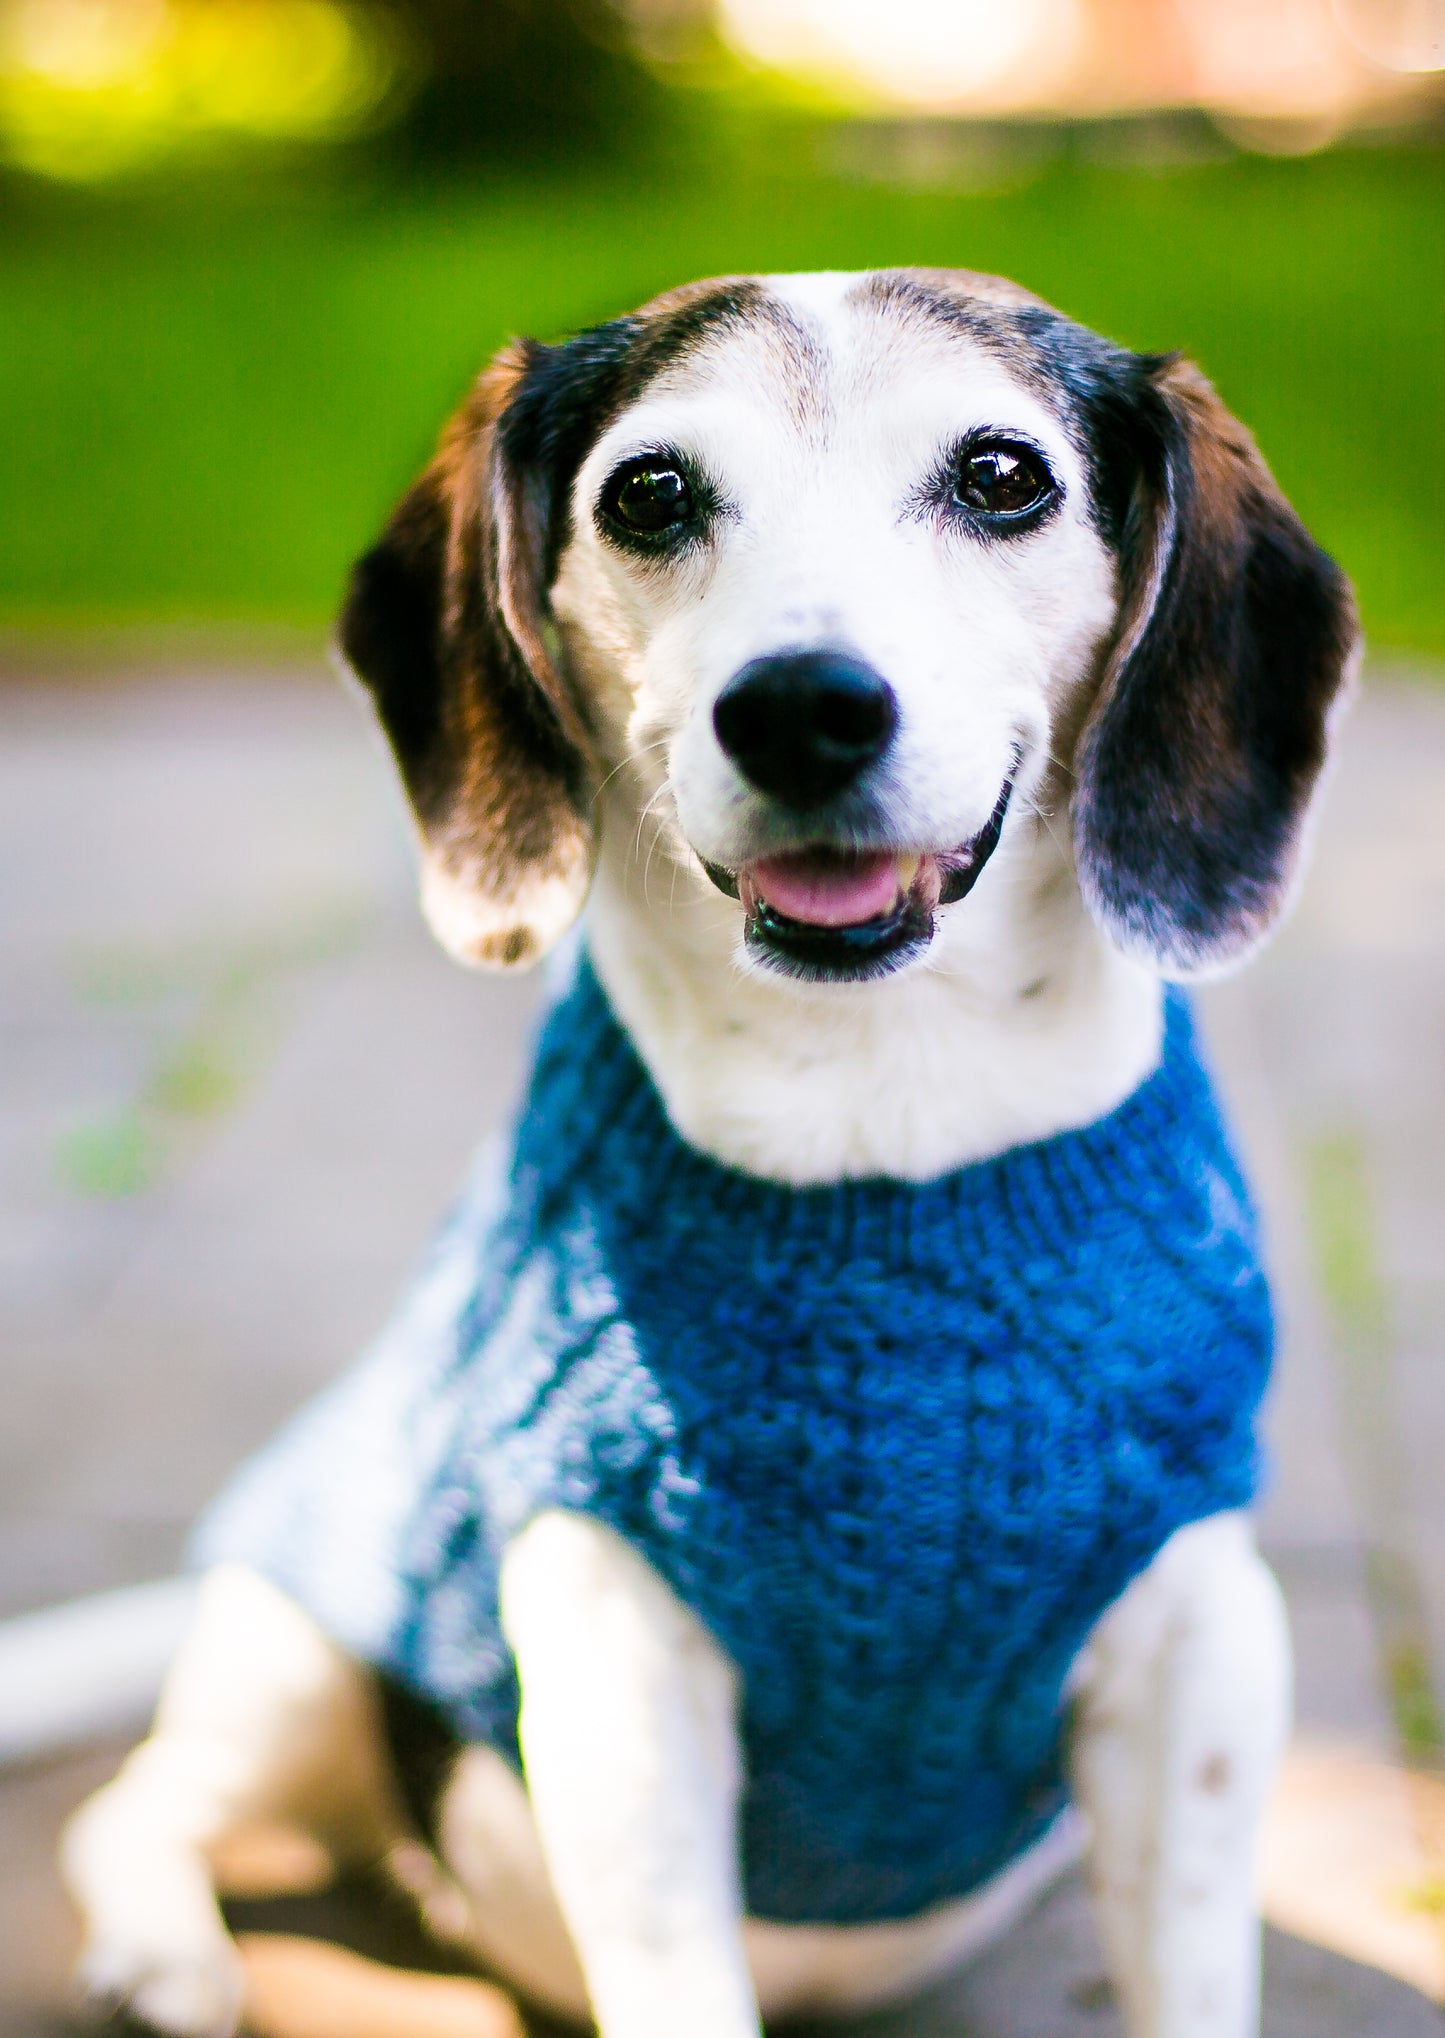 Cat & Dog Pet Sweaters in Naperville - LAST OF THIS COLORWAY!